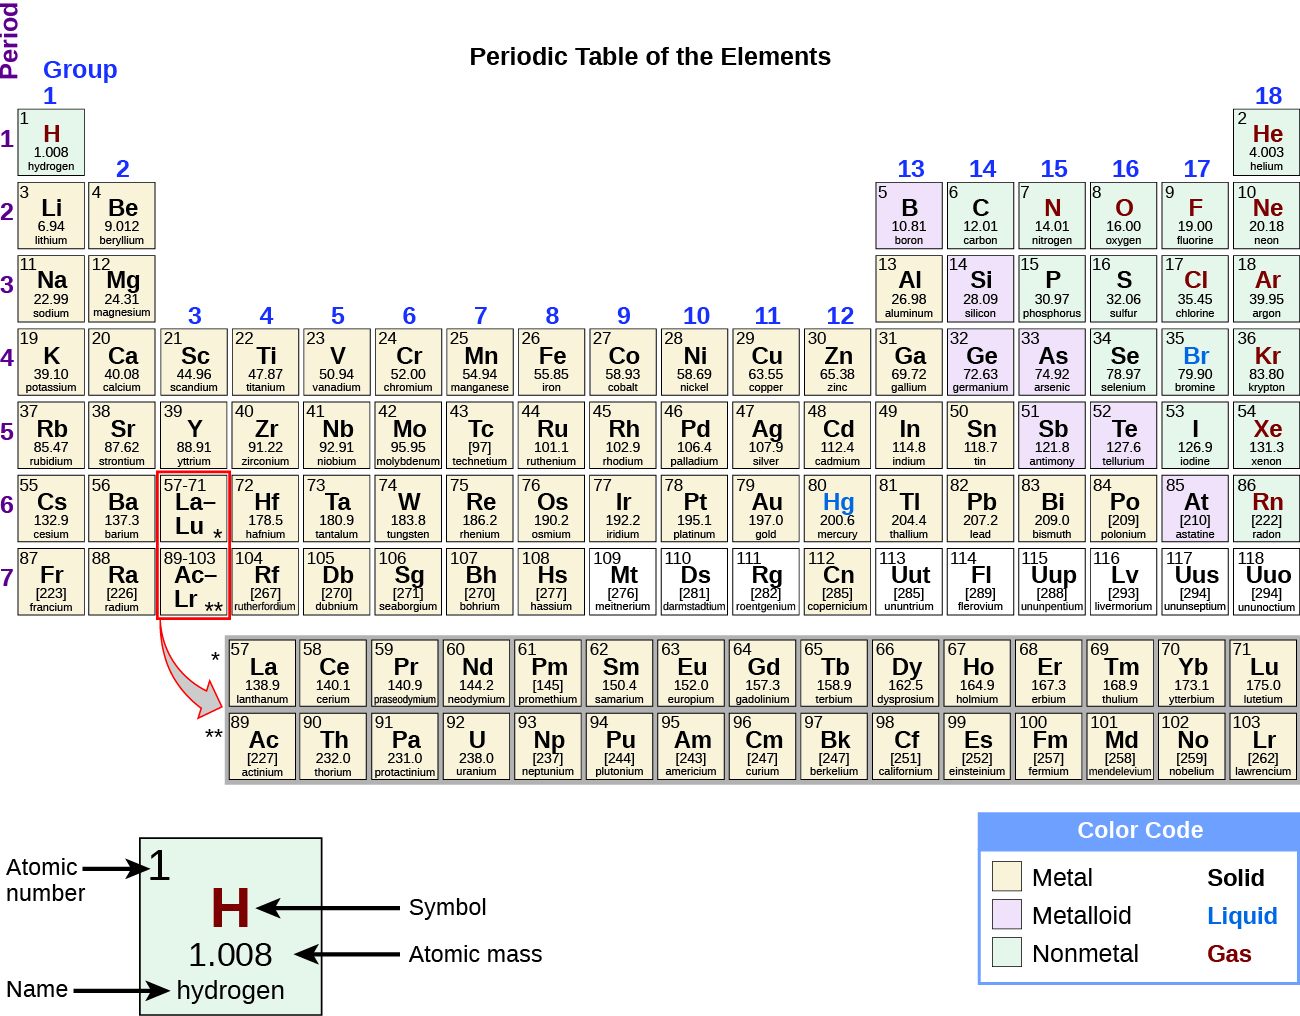 group one in the periodic table